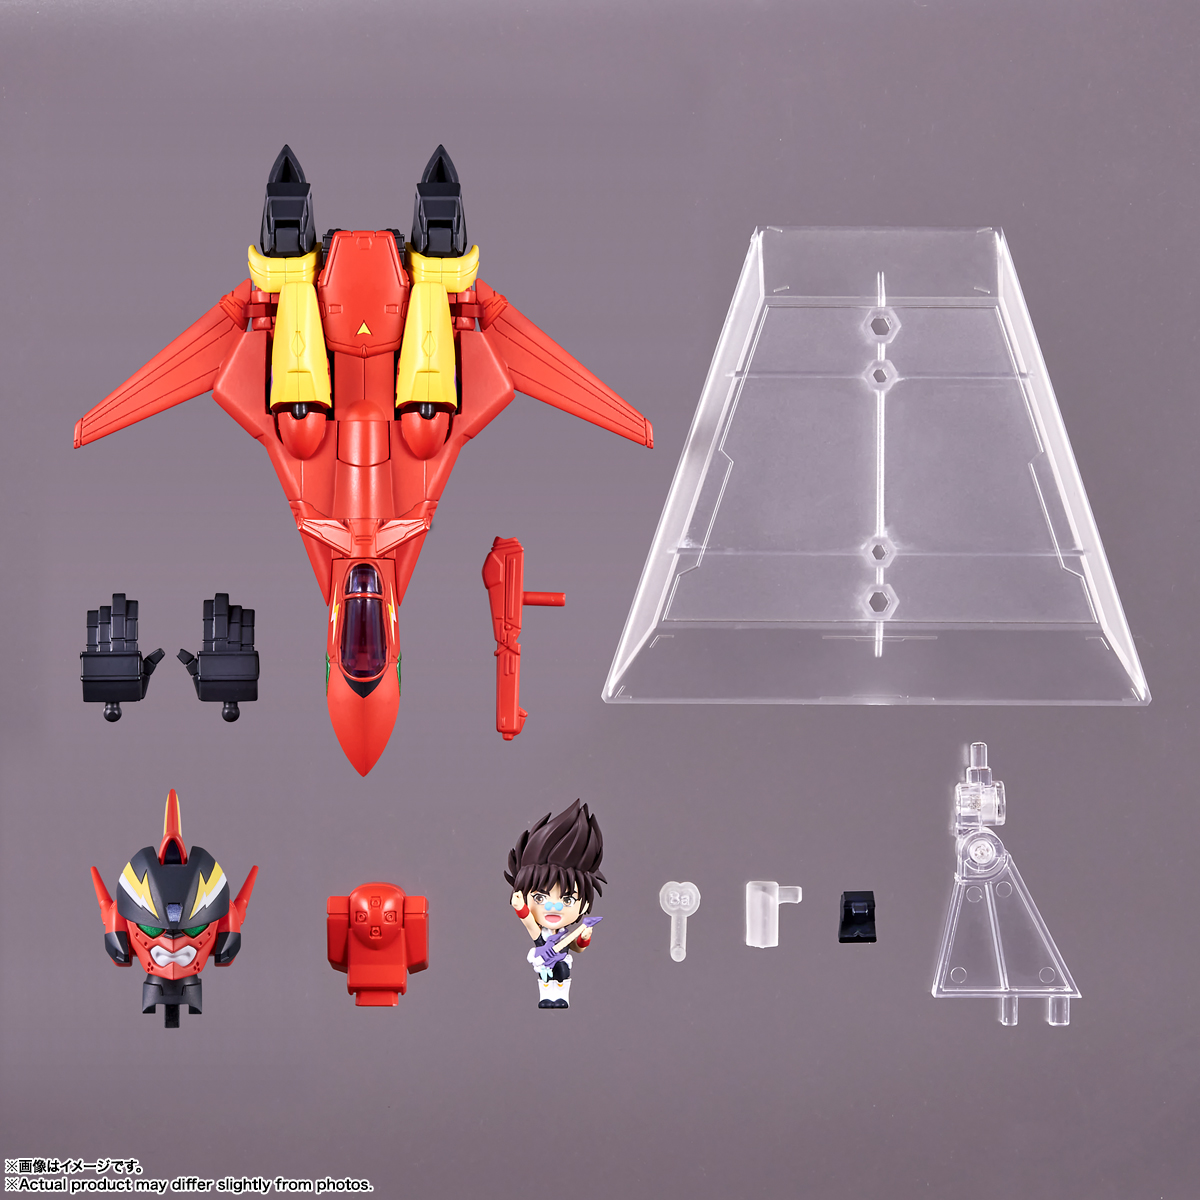 macross-7-vf-19-custom-fire-valkyrie-and-basara-nekki-tiny-session-action-figure-set image count 9